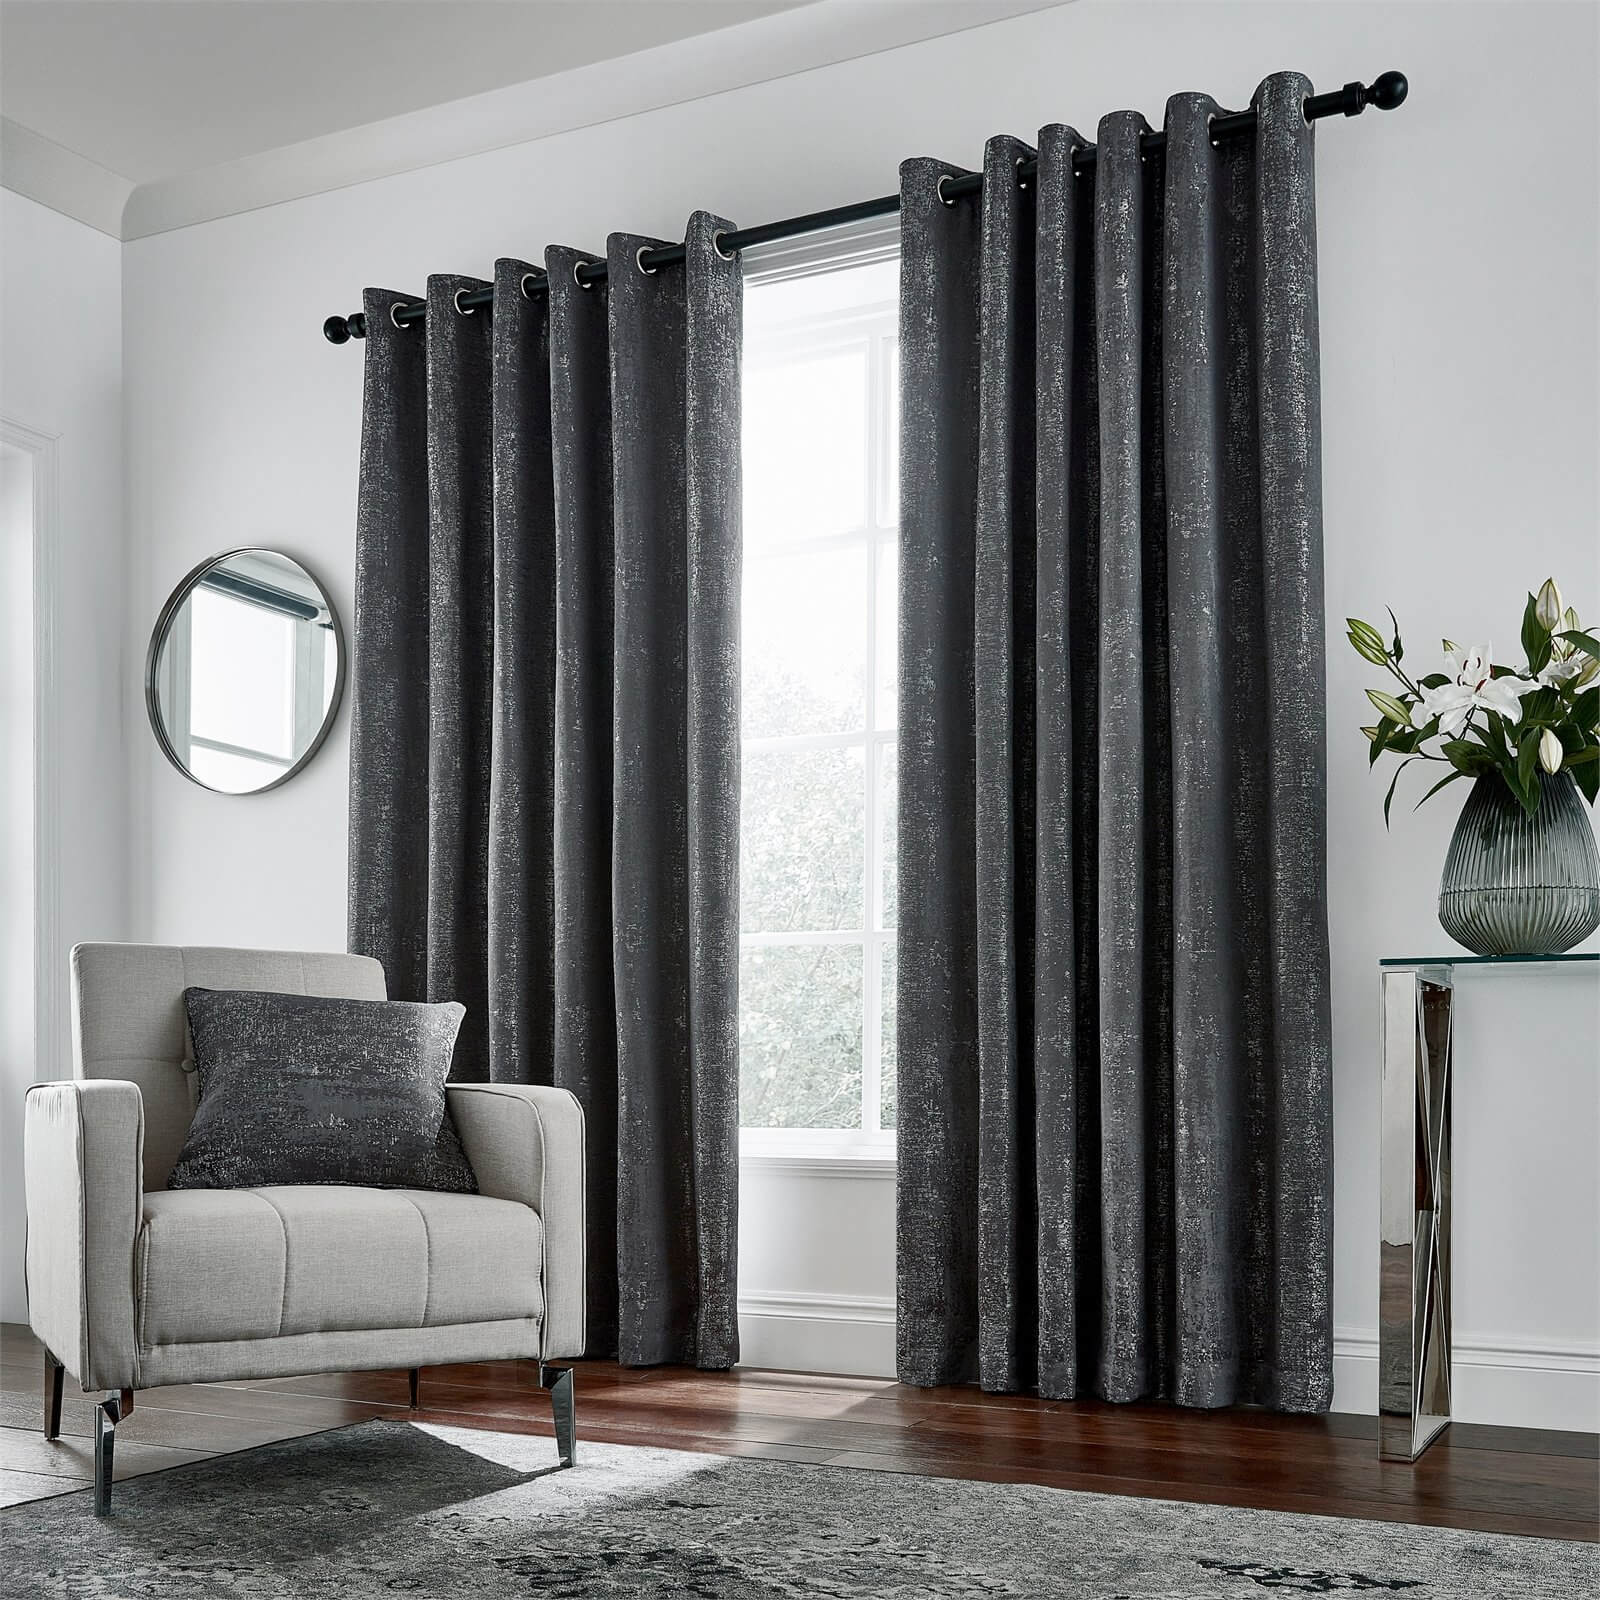 Peacock Blue Hotel Collection Roma Lined Curtains 66 x 72 - Gunmetal